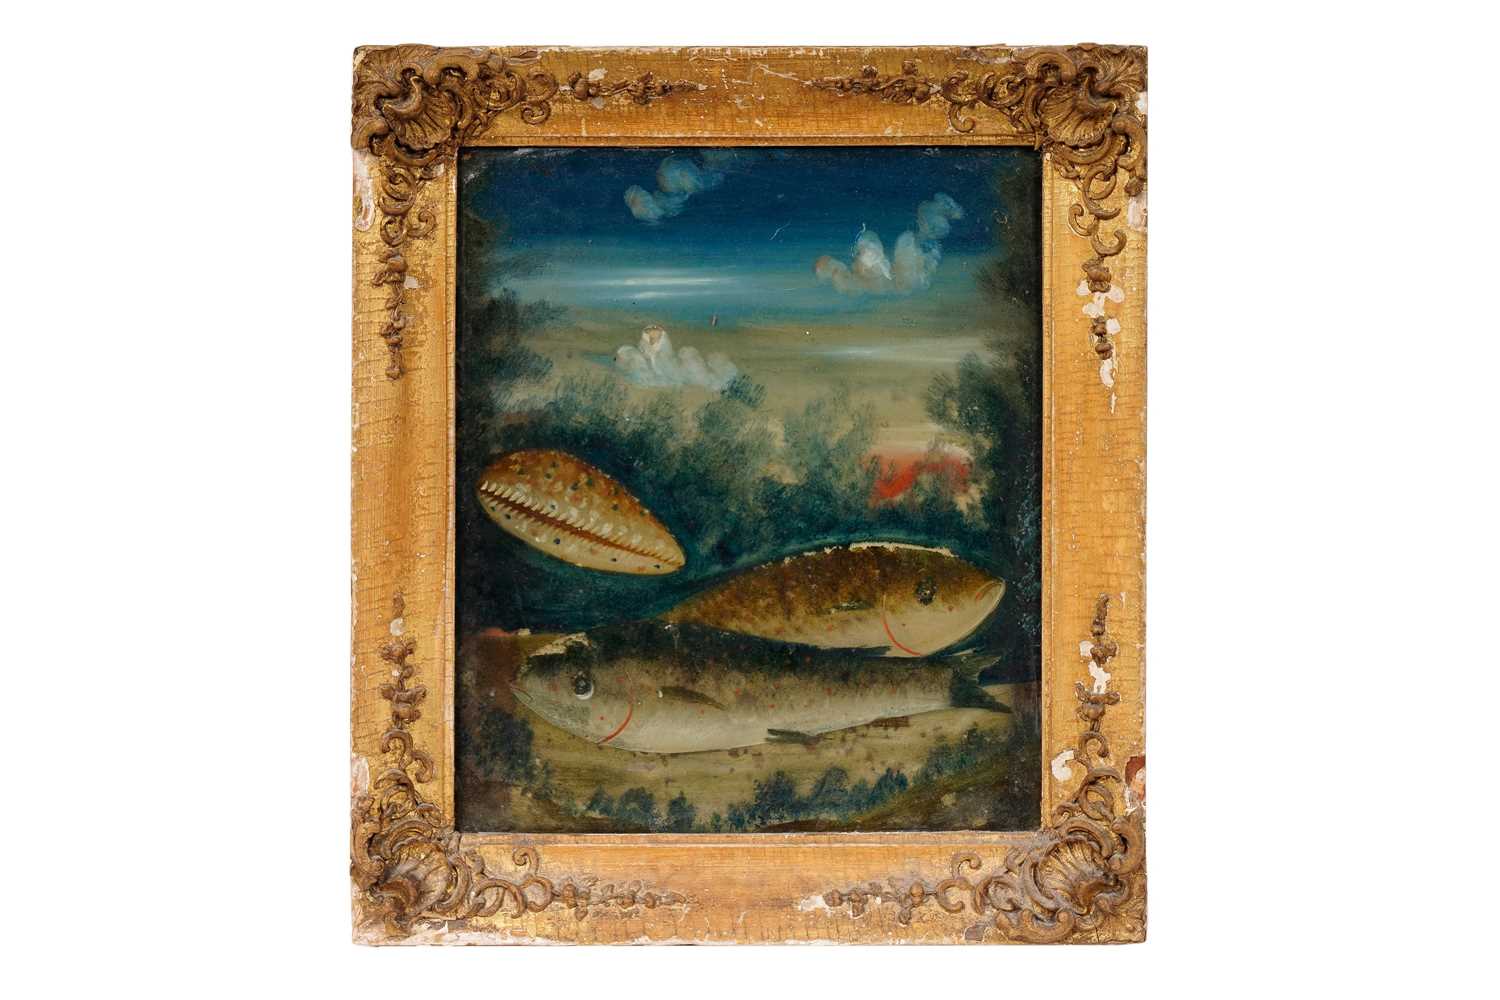 19th Century British School - Underwater View of Fish and a Cowrie Shell | reverse glass painting